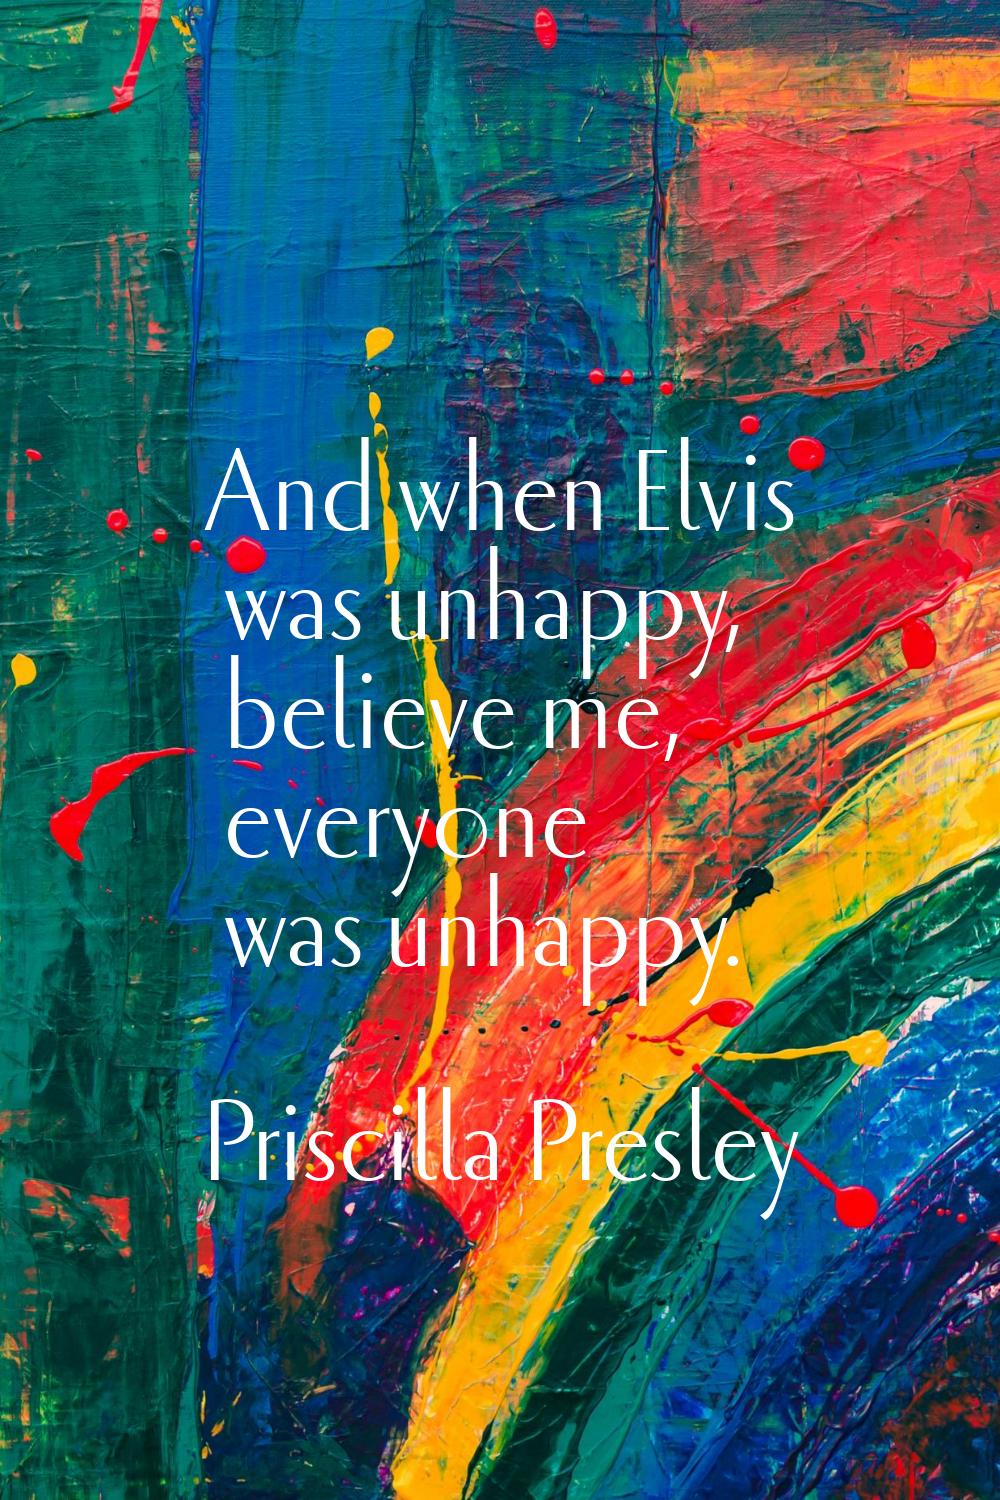 And when Elvis was unhappy, believe me, everyone was unhappy.